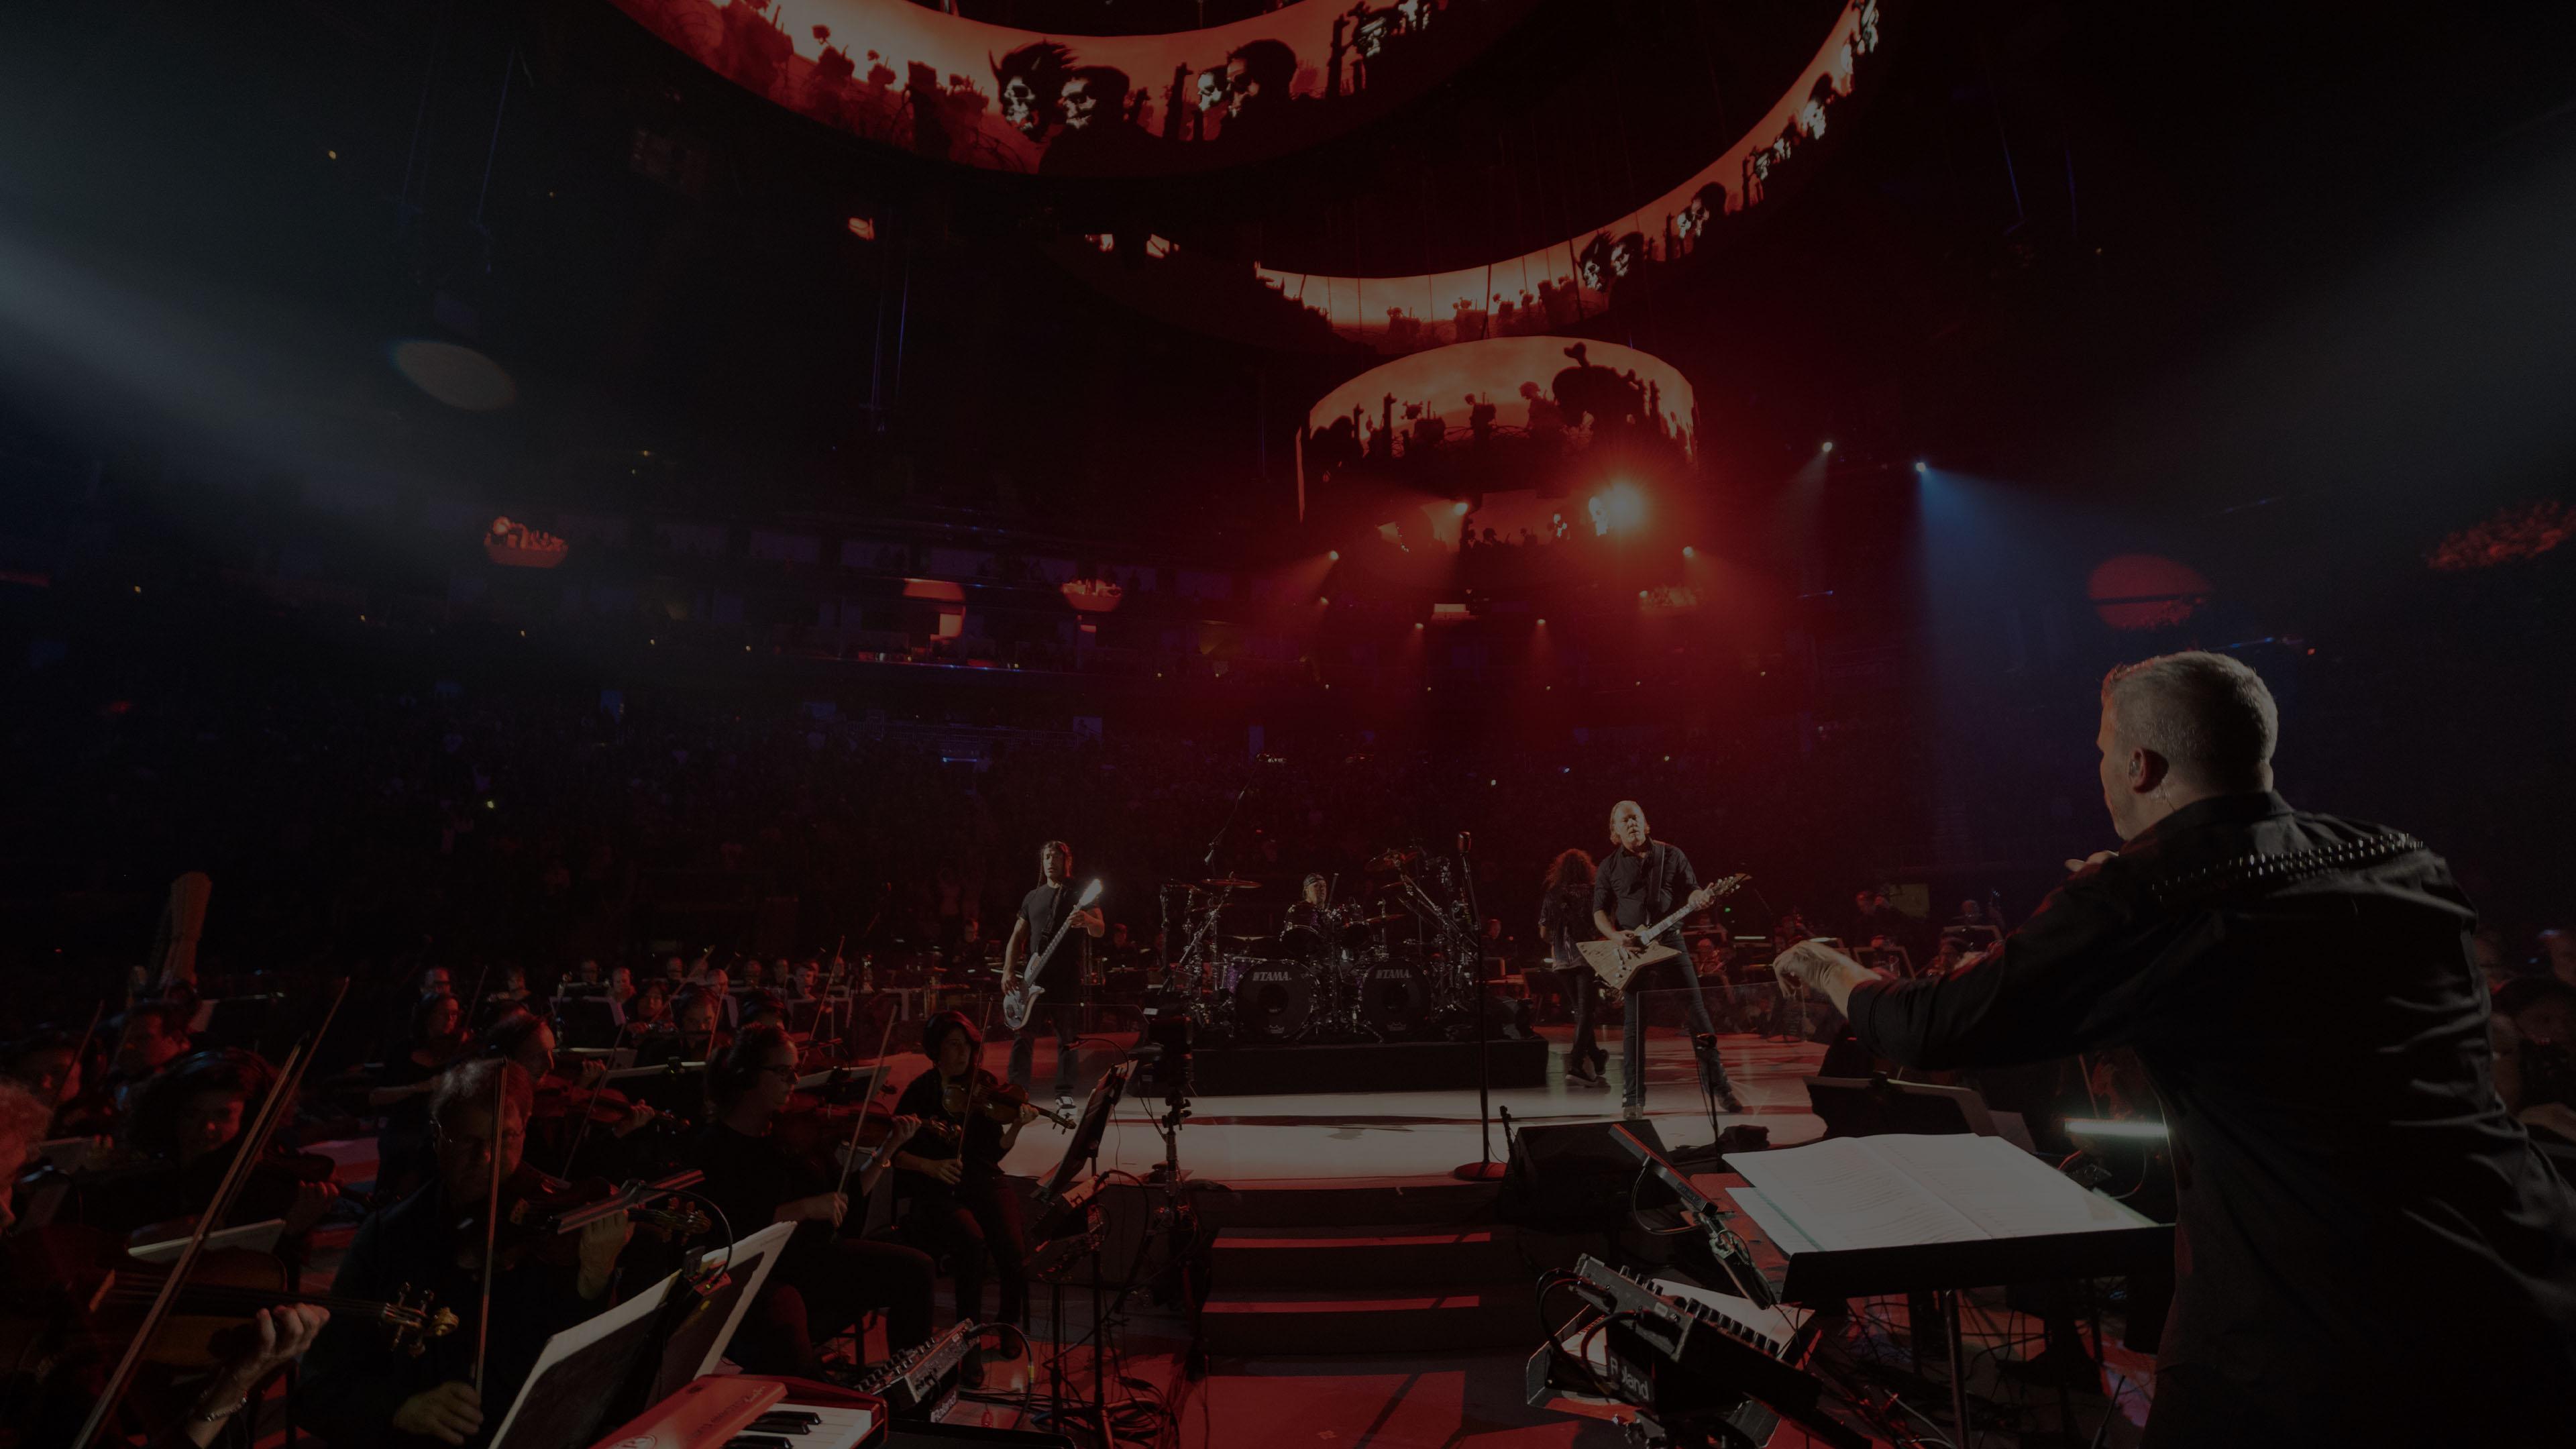 Metallica and the San Francisco Symphony at Chase Center in San Francisco, CA on September 8, 2019